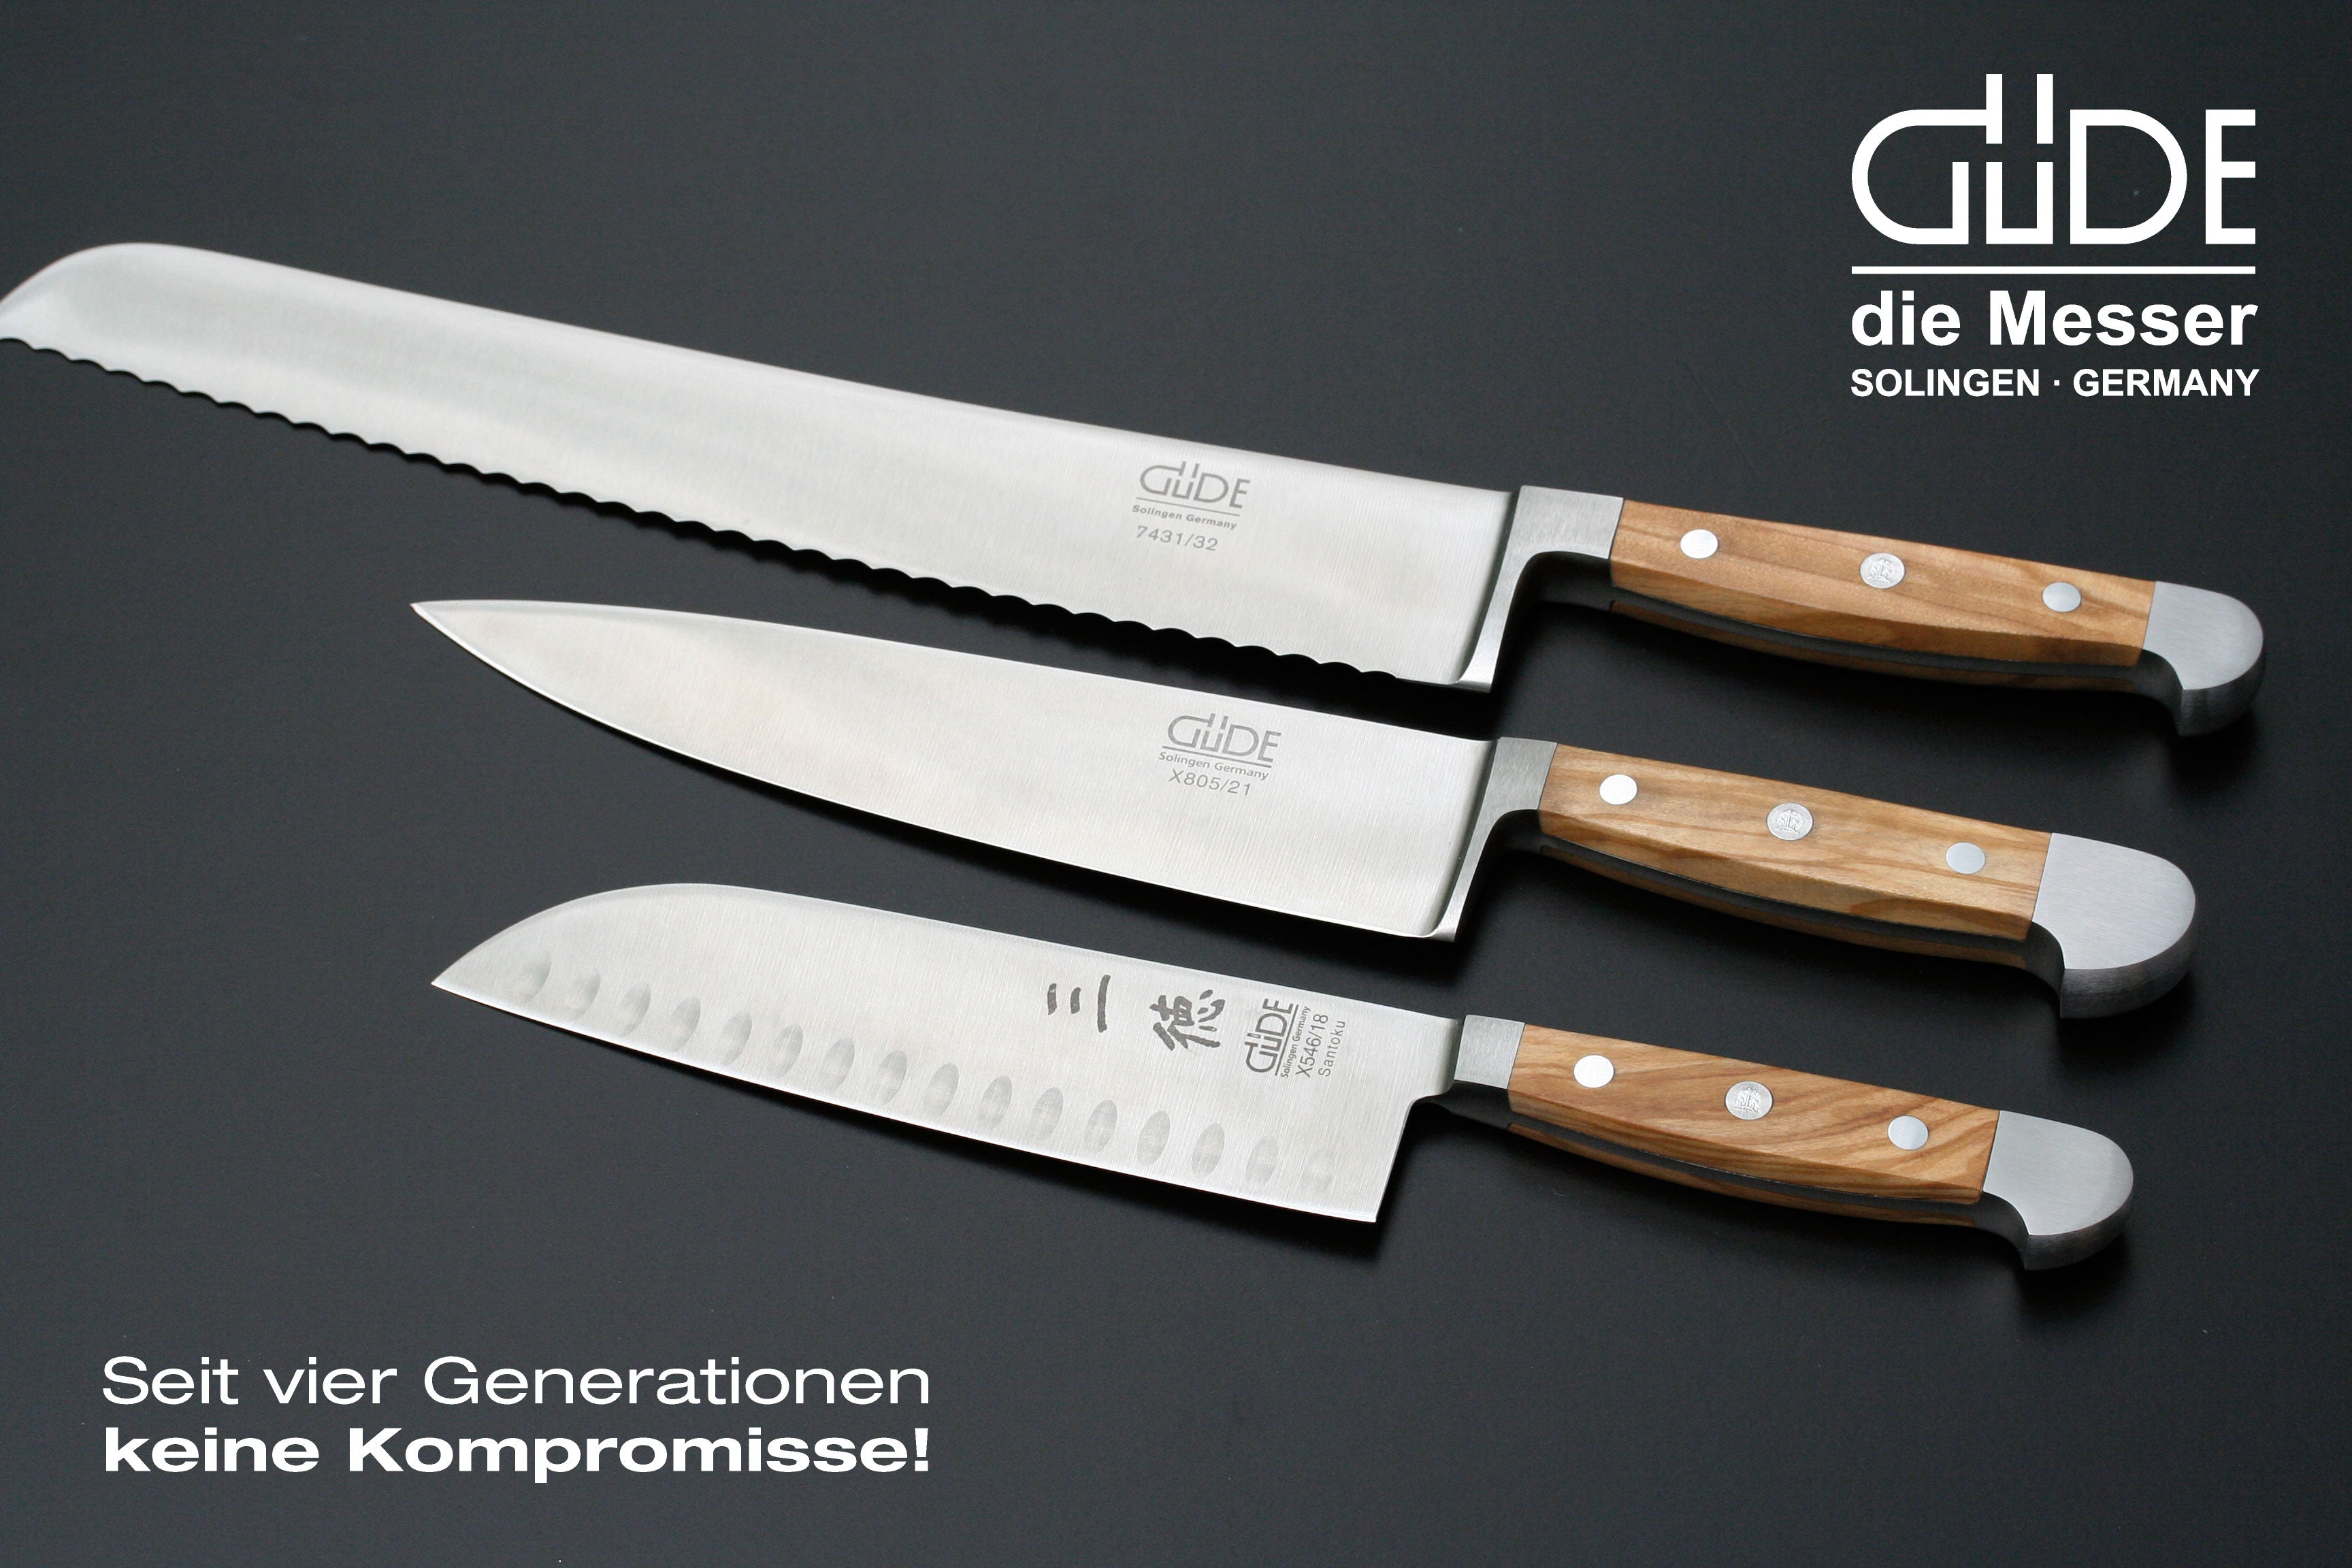 The rationale for choosing German knives over Japanese knives.